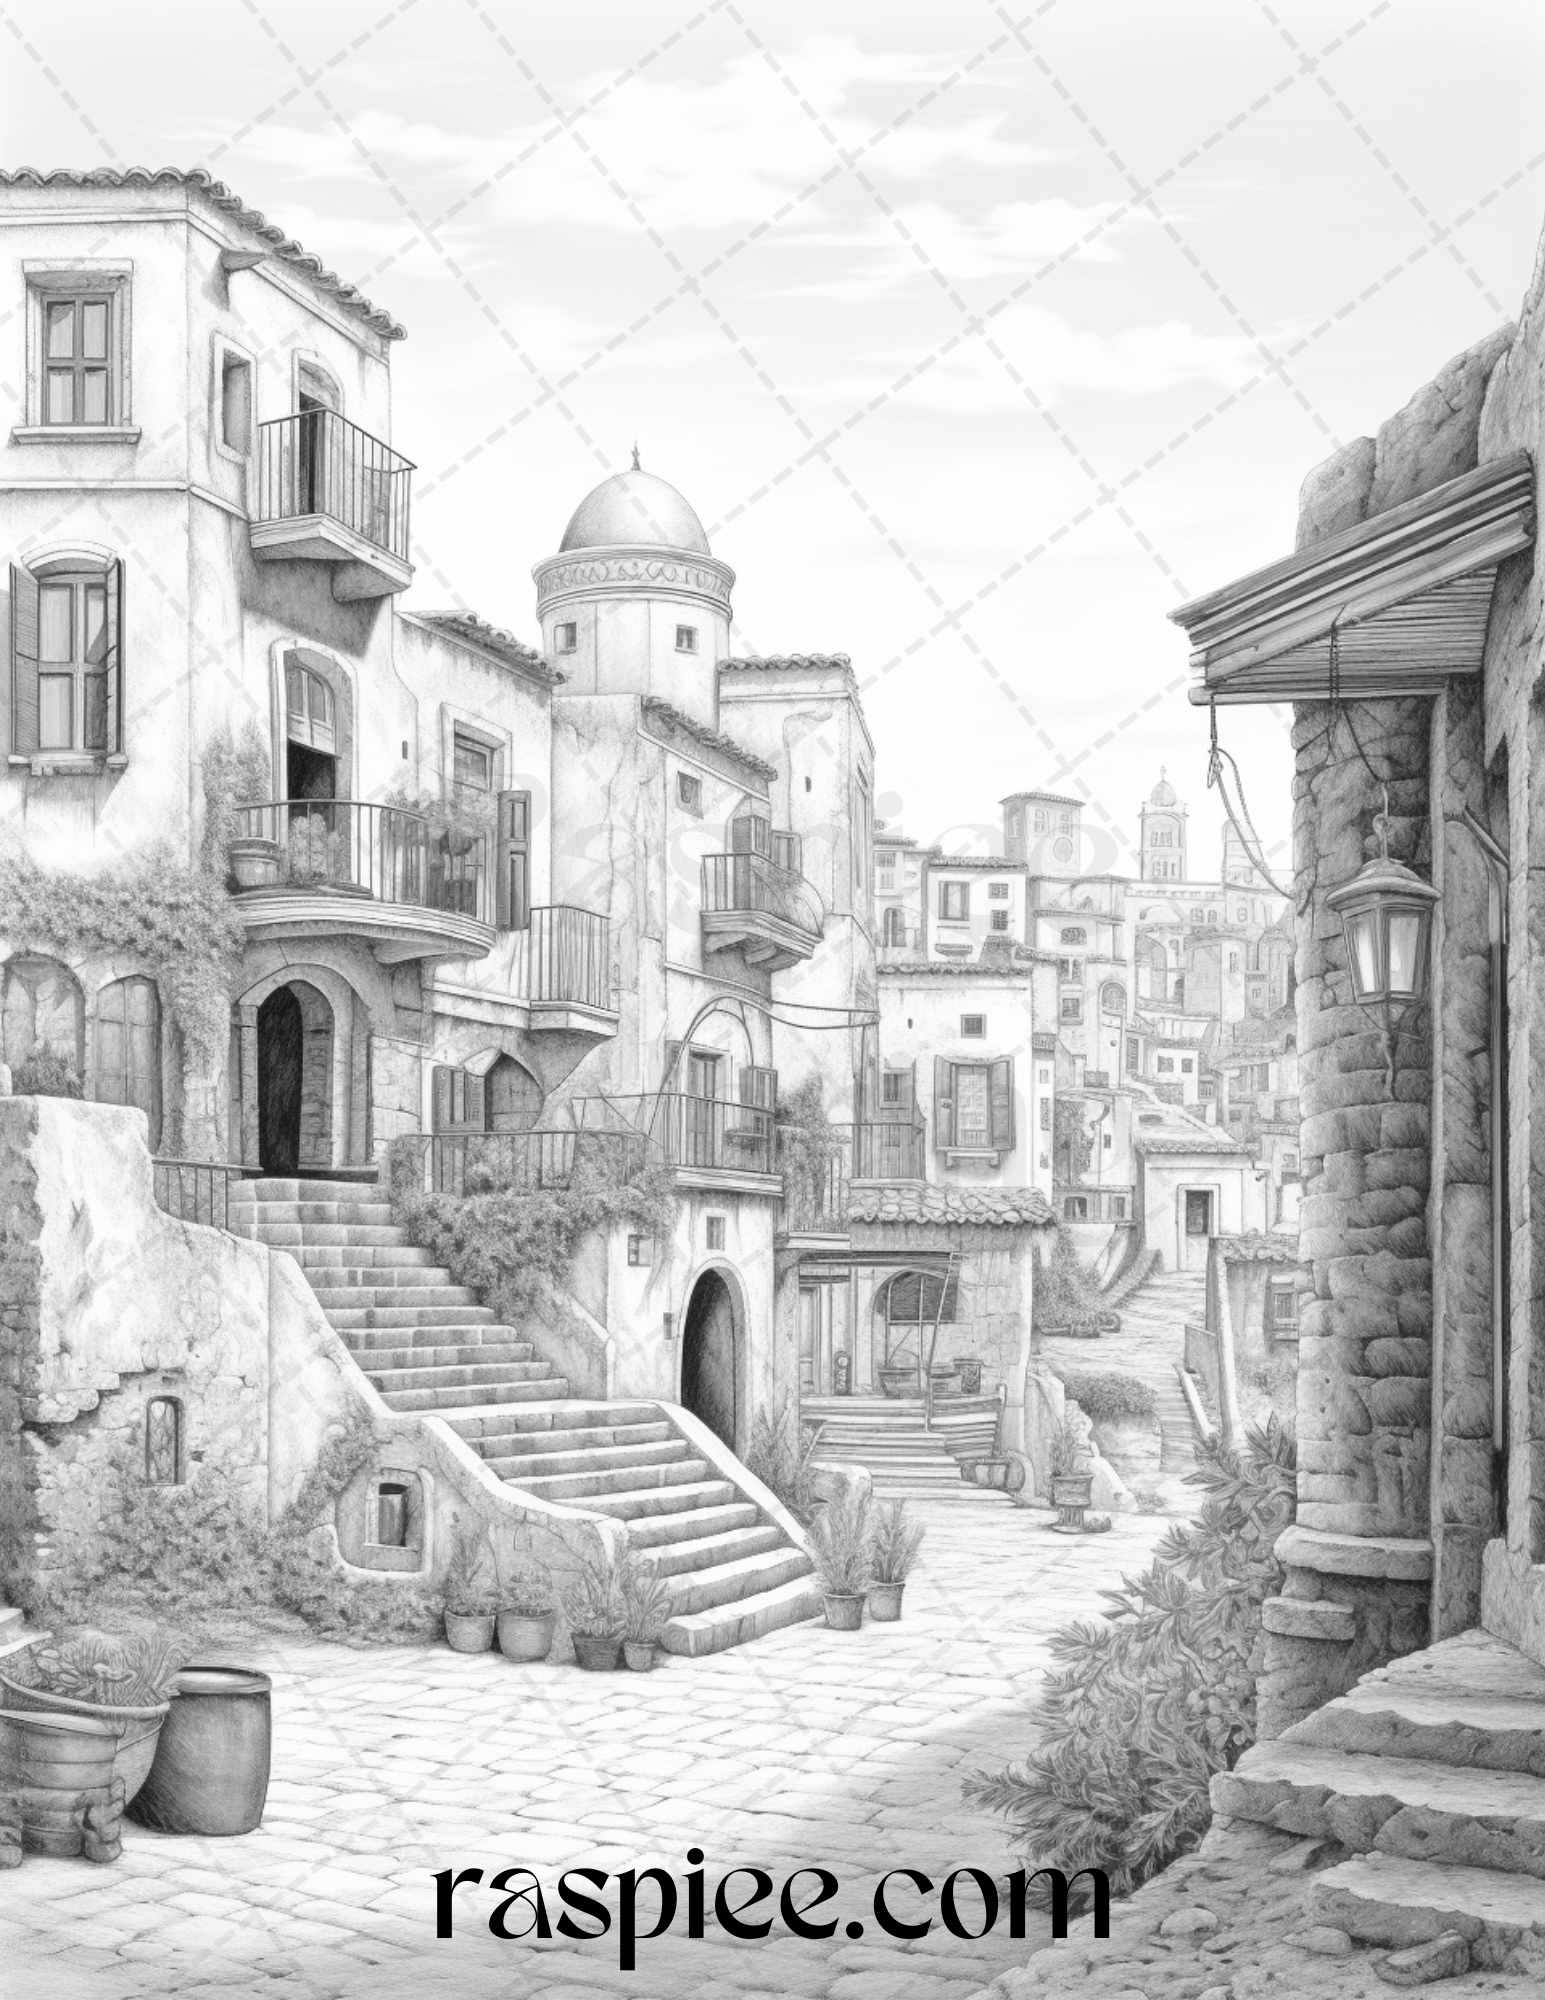 Roman Architecture Grayscale Coloring Pages Printable for Adults, PDF File Instant Download - Raspiee Coloring